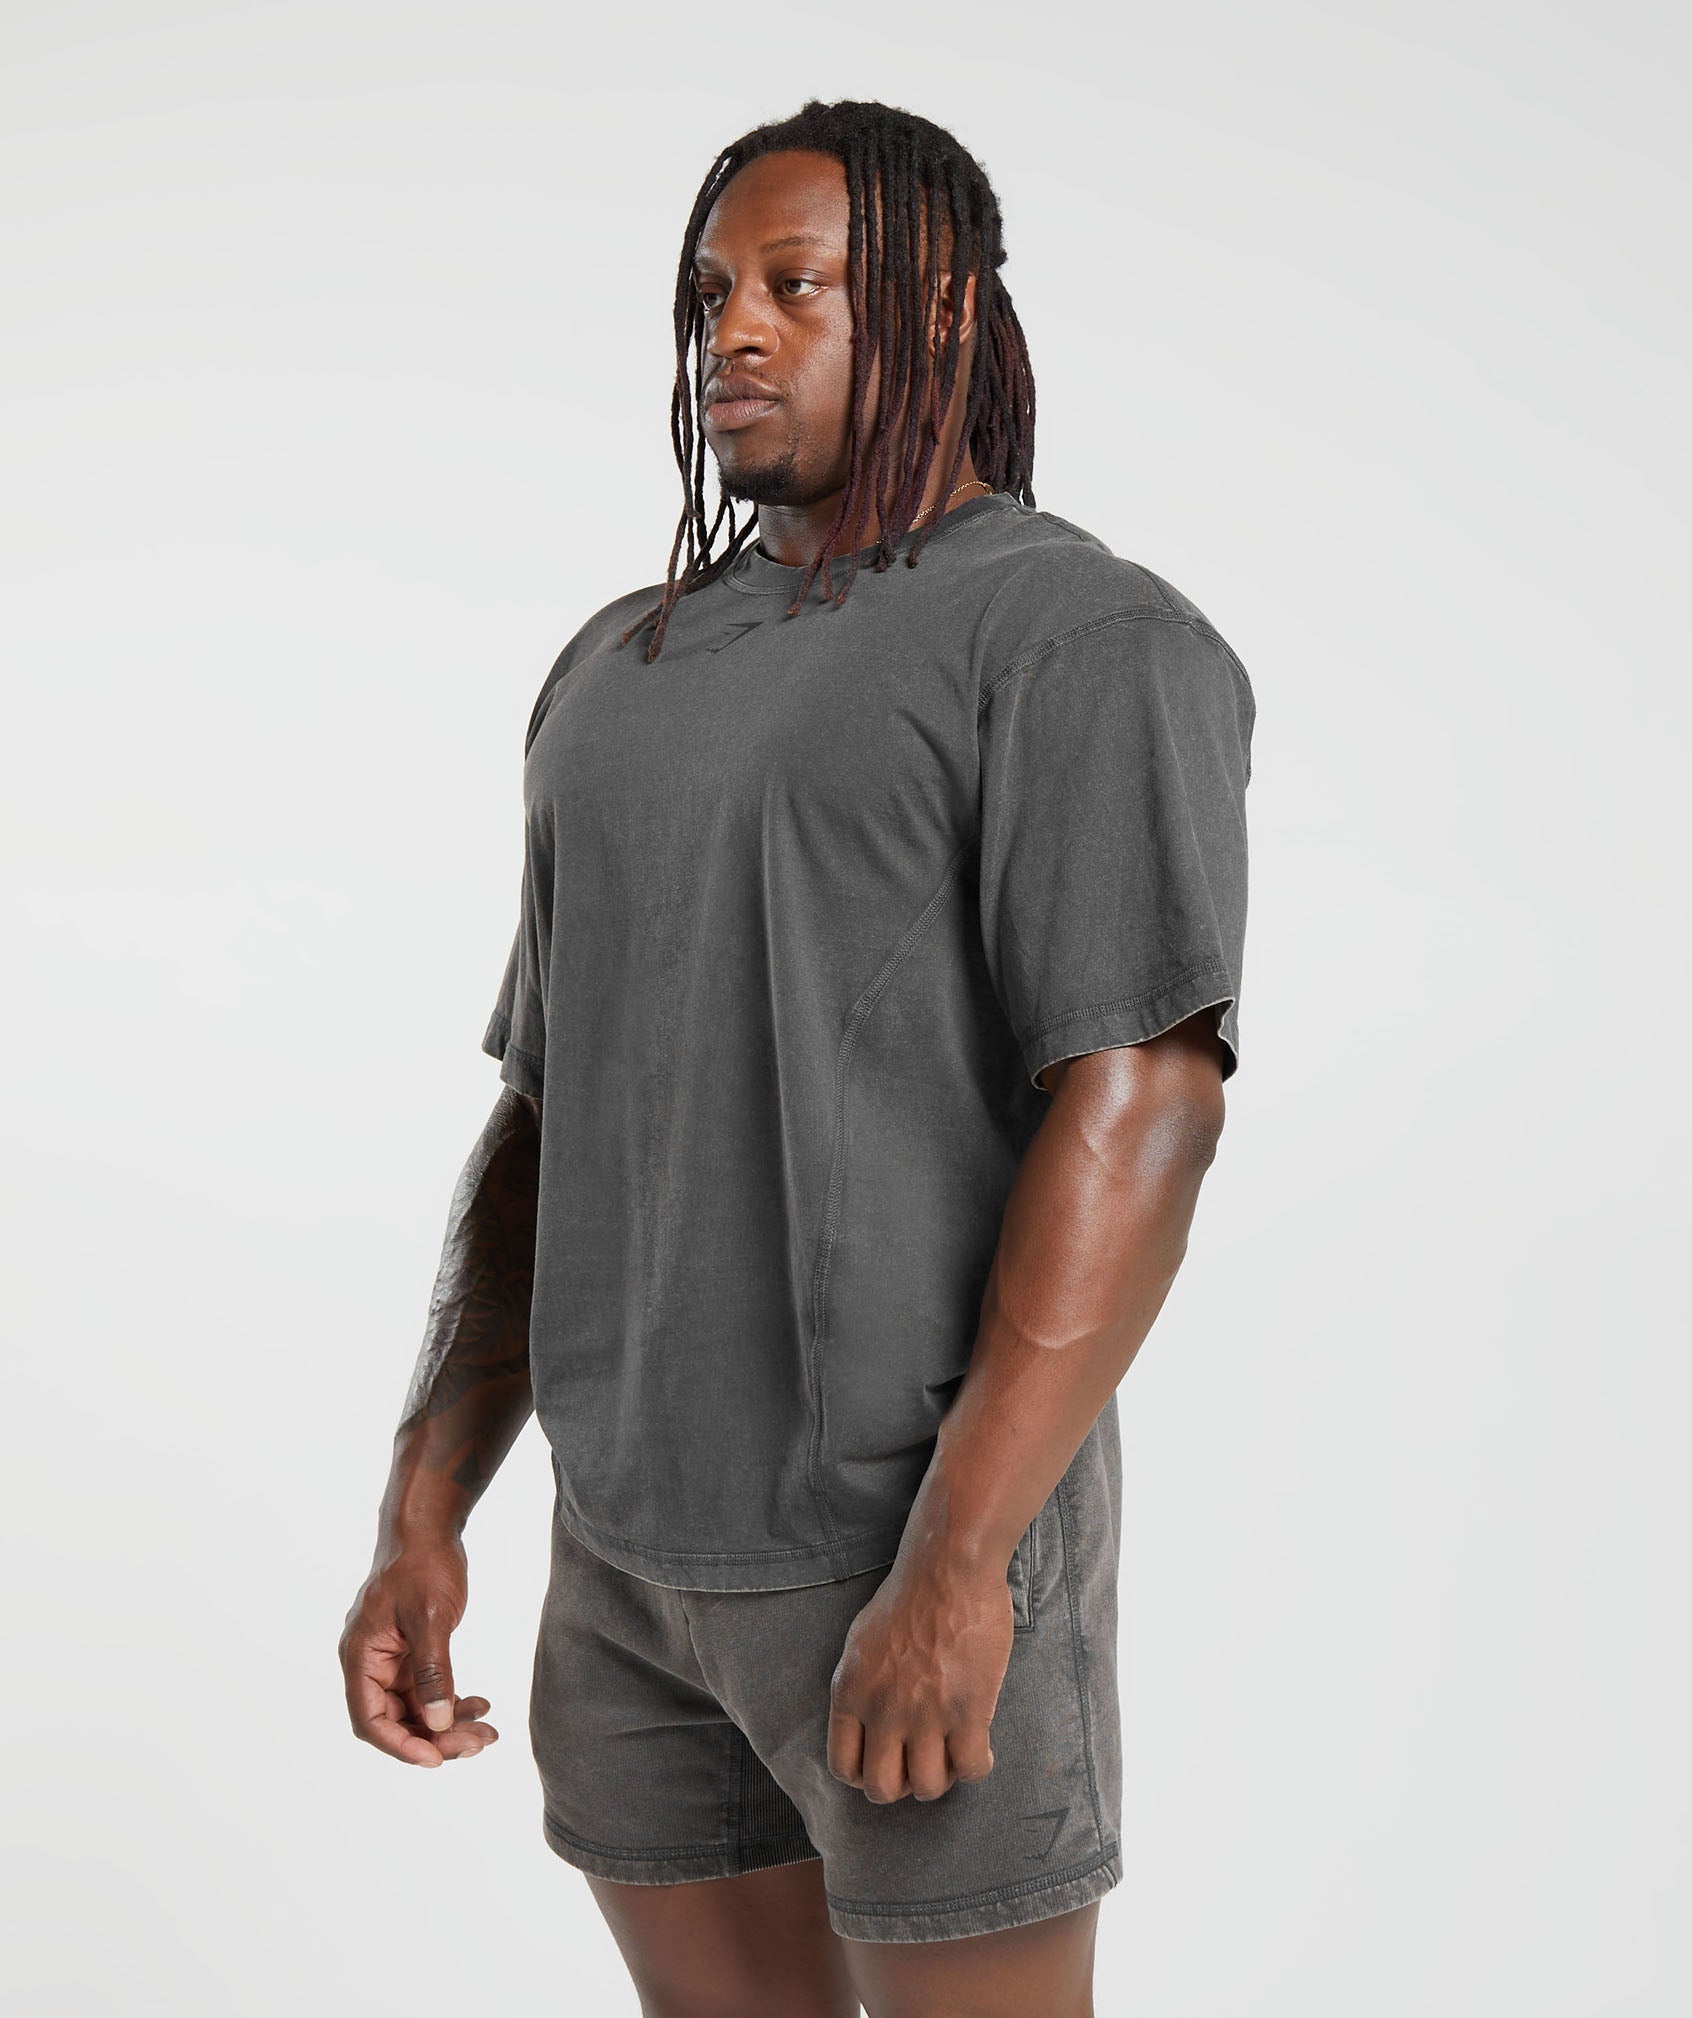 Heritage Washed T-Shirt in Onyx Grey - view 3